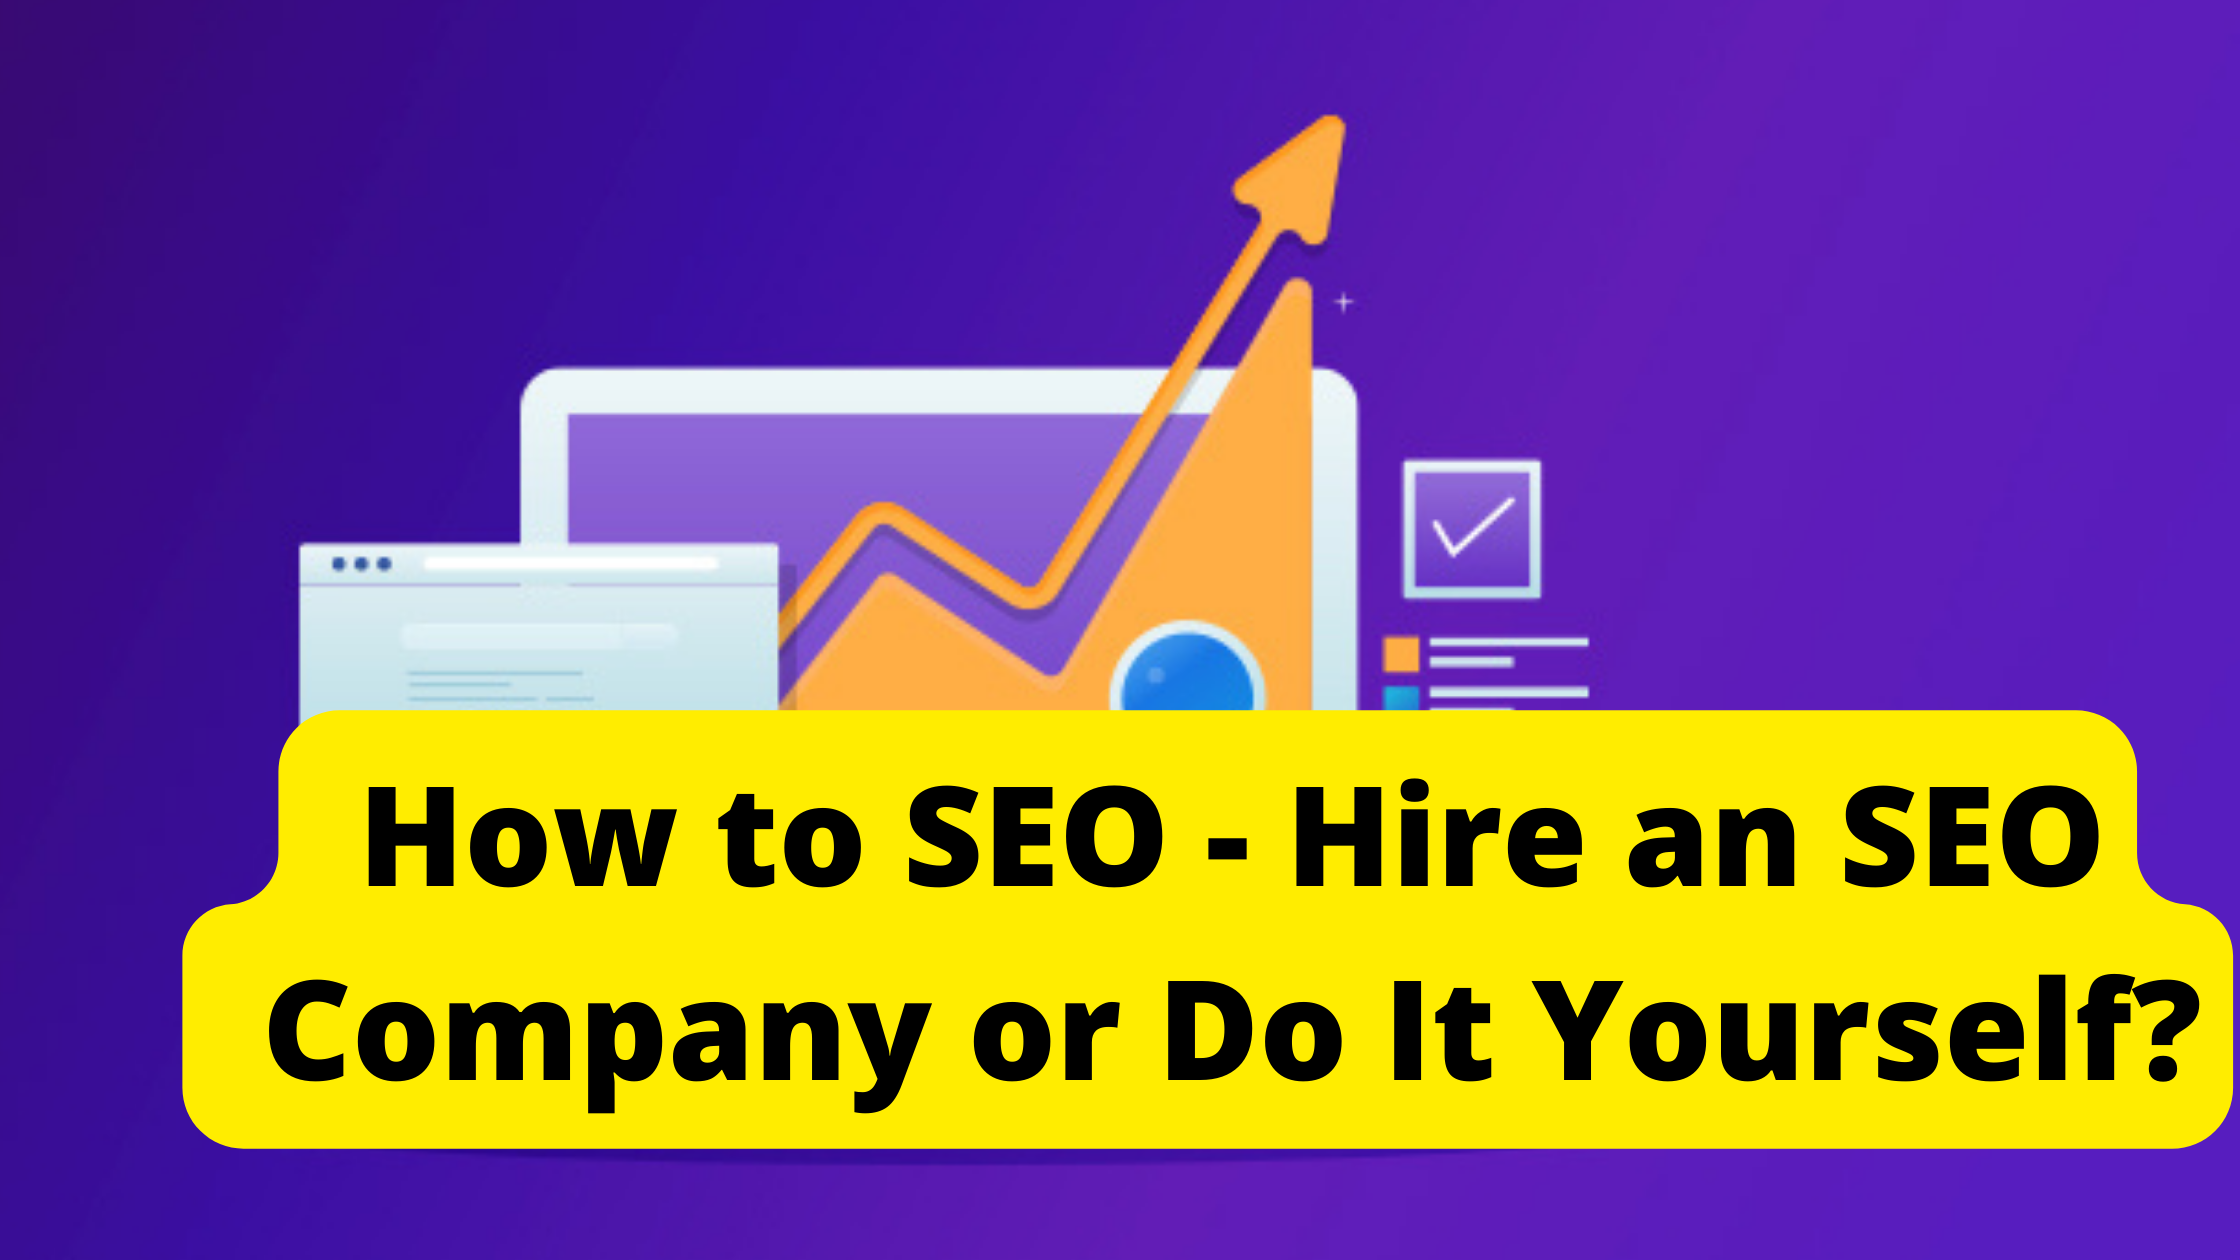 How to SEO – Hire an SEO Company or Do It Yourself?